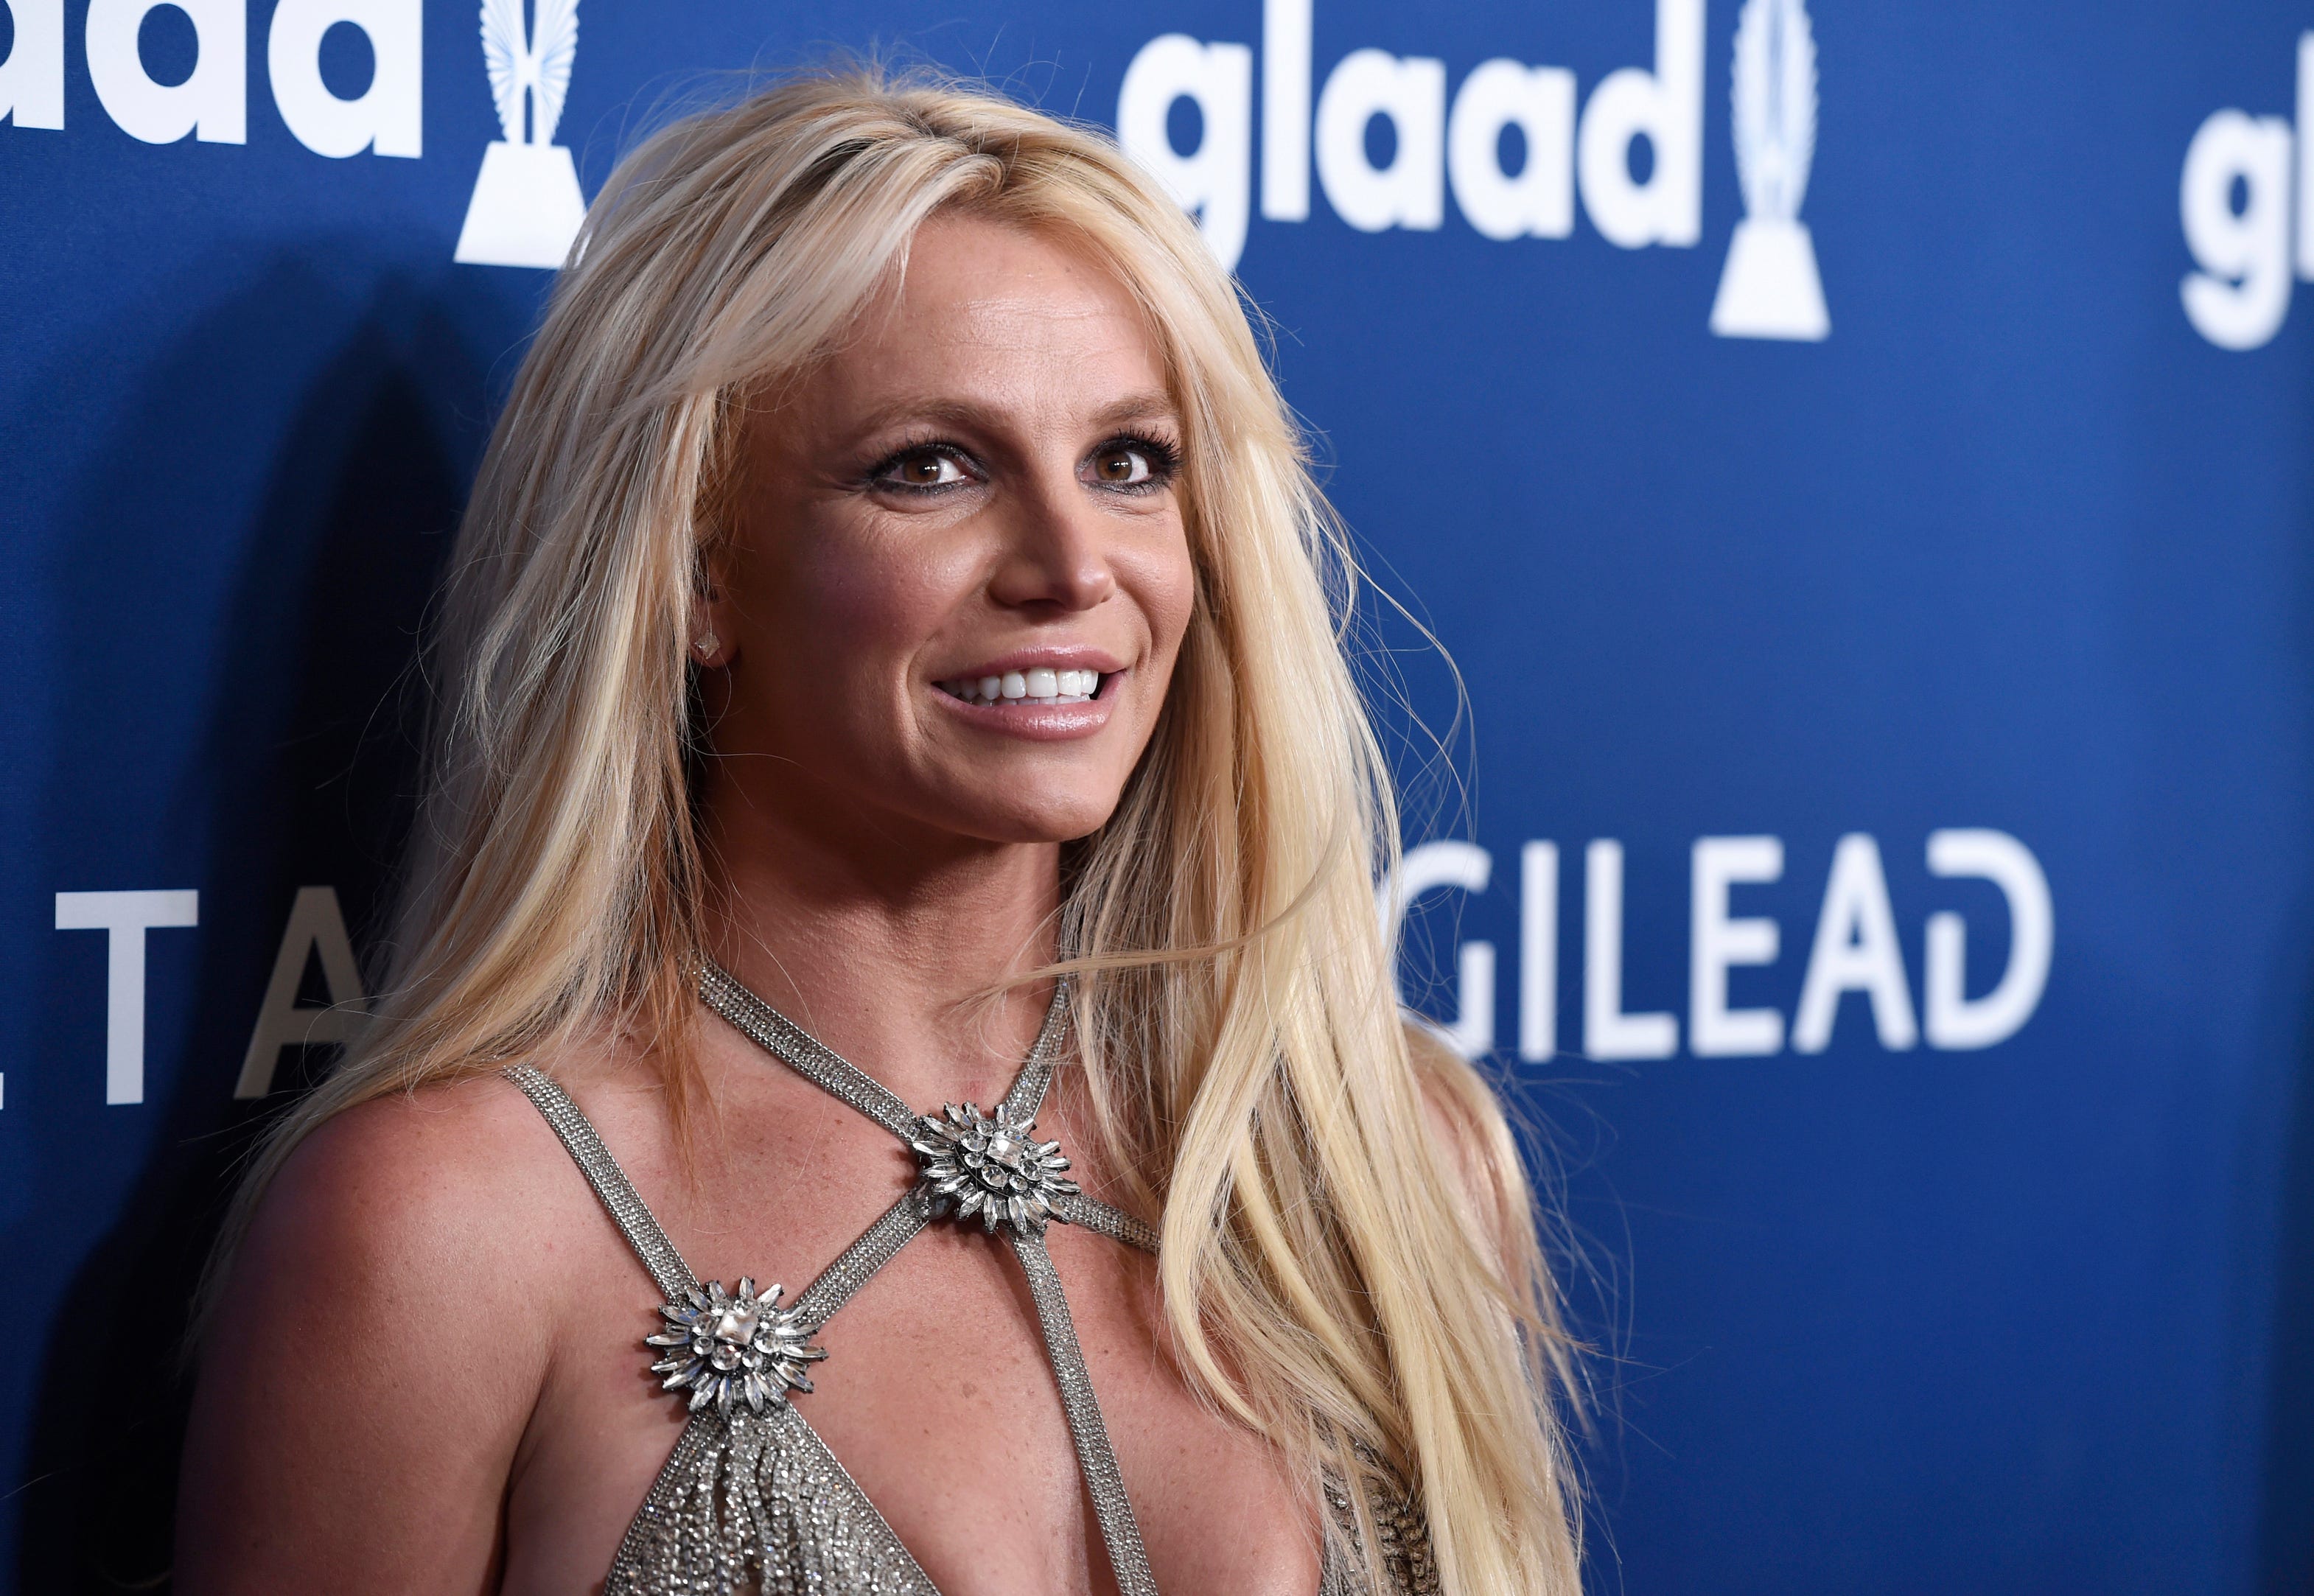 britney-spears-was-criticized-by-fans-on-social-networks-2